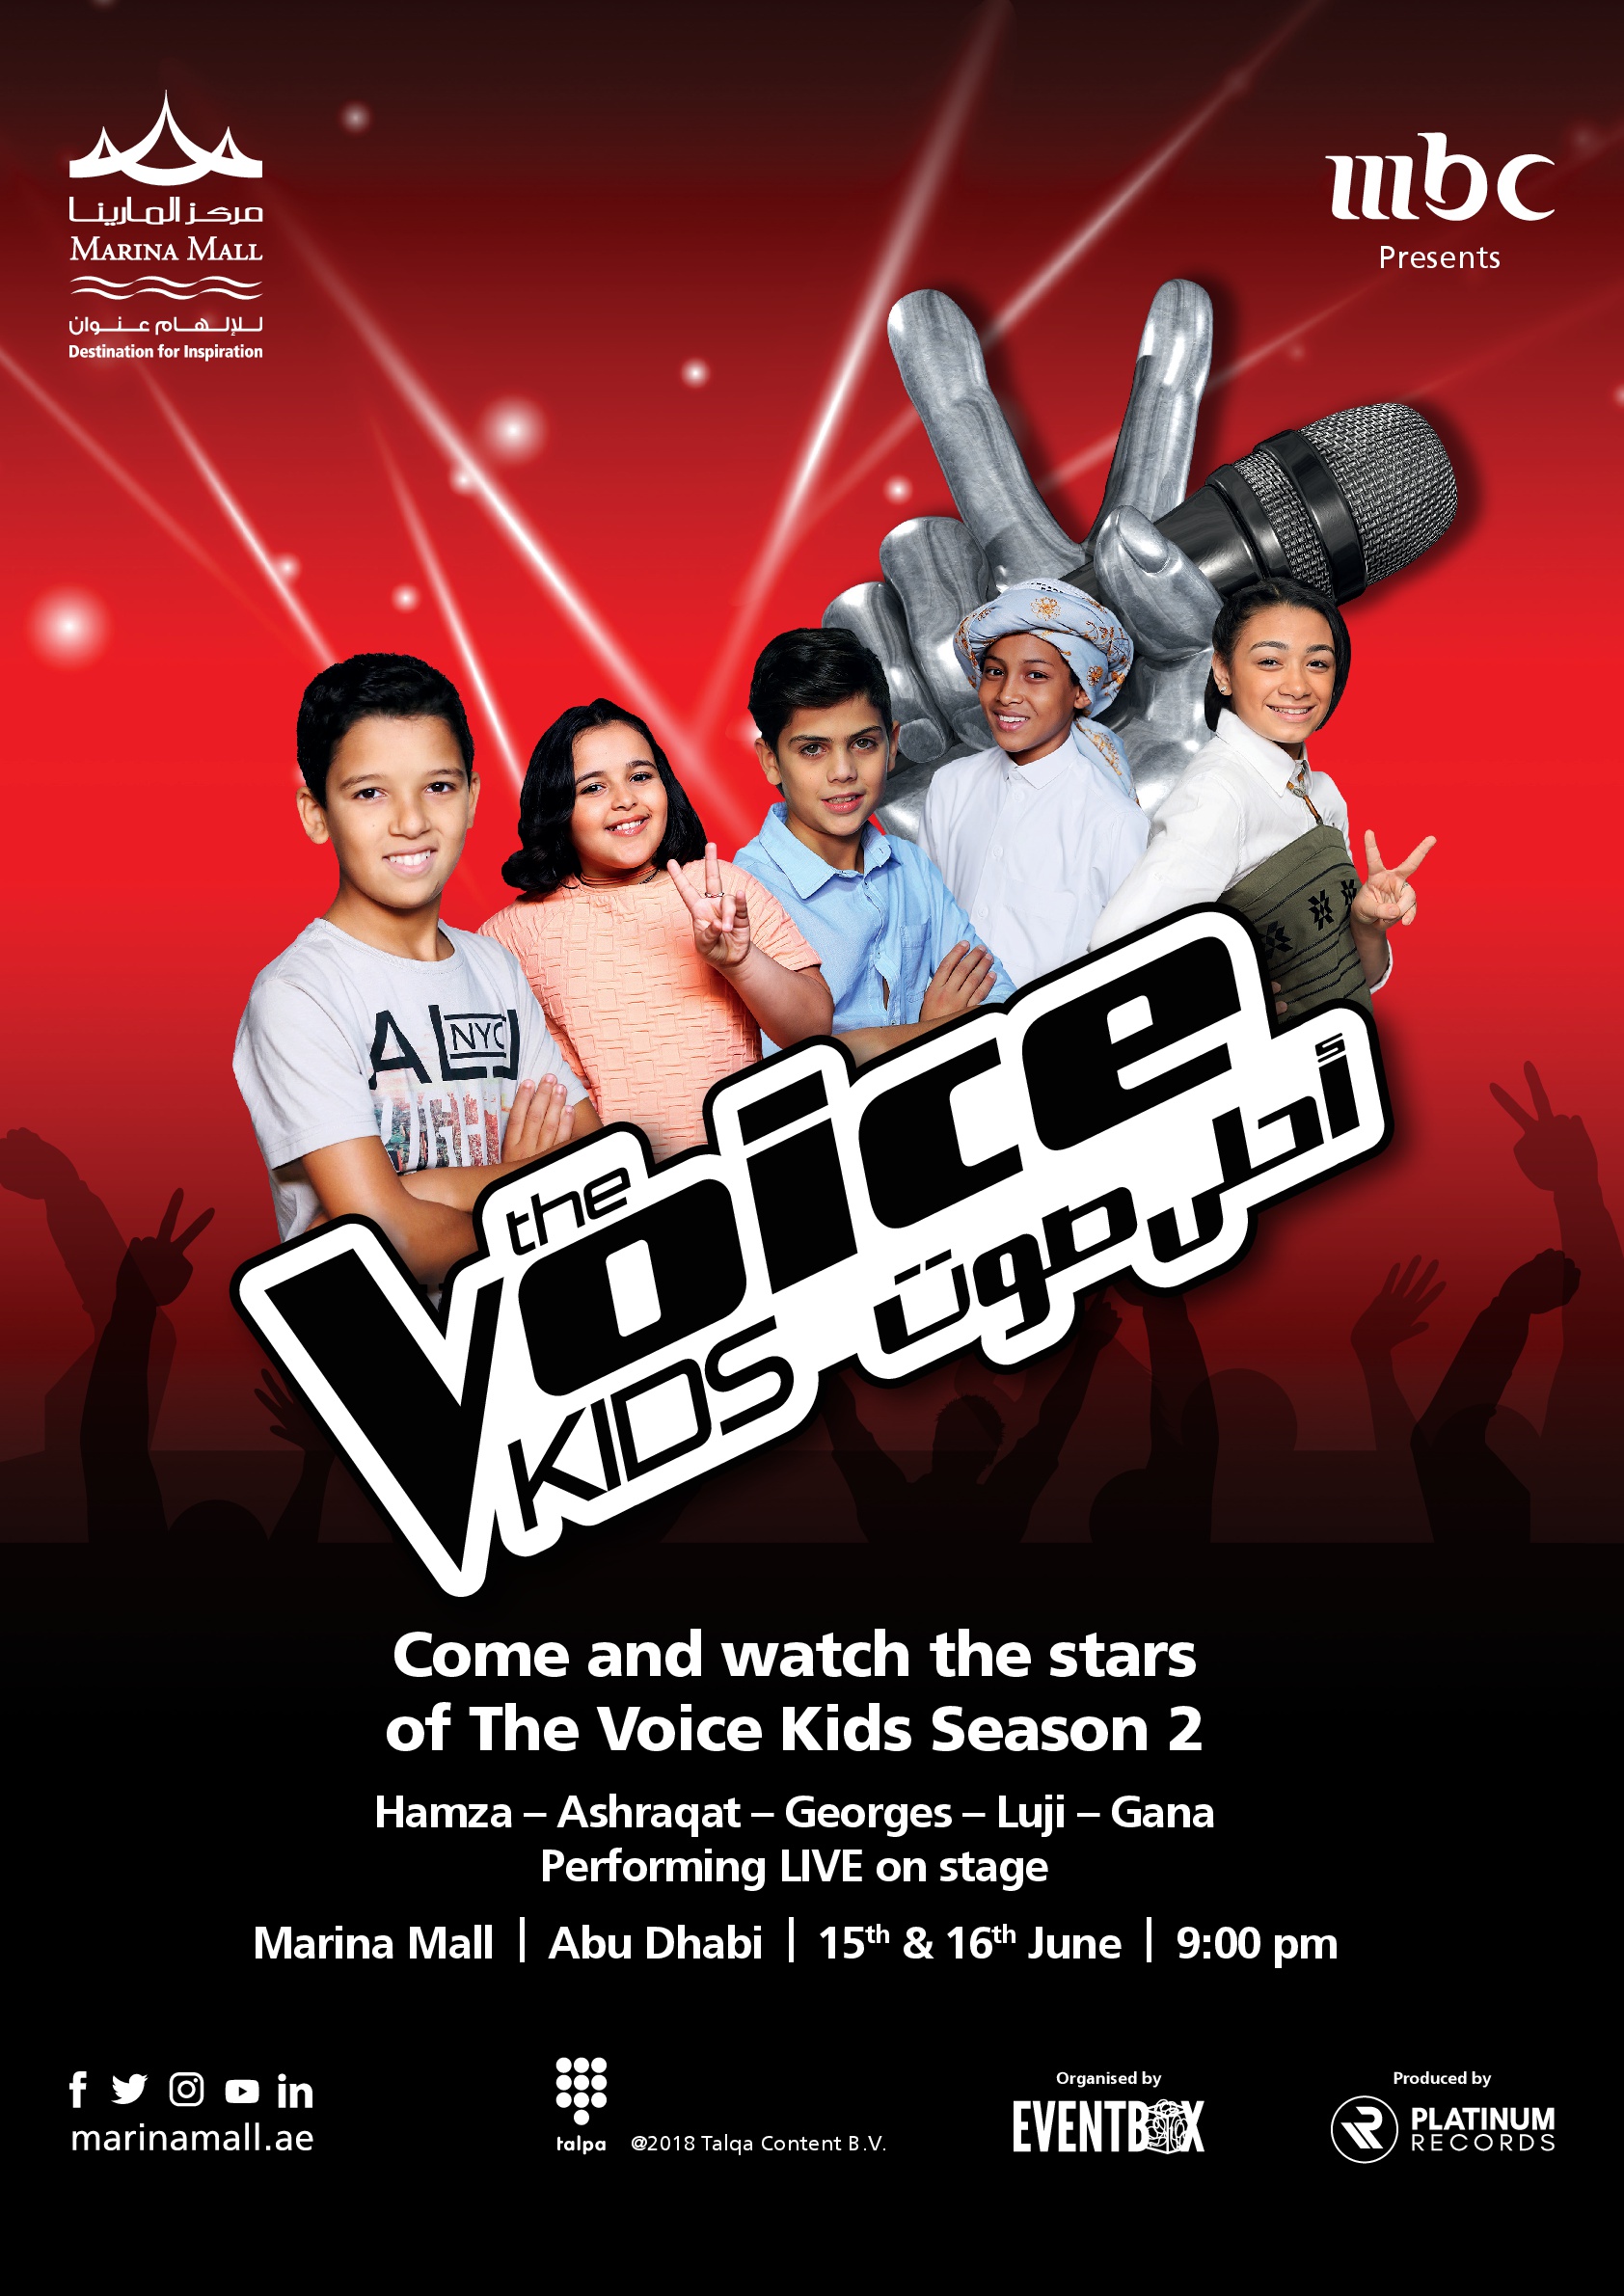 Be Entertained This Eid As The Voice Kids Tour Abu Dhabi For The First Time